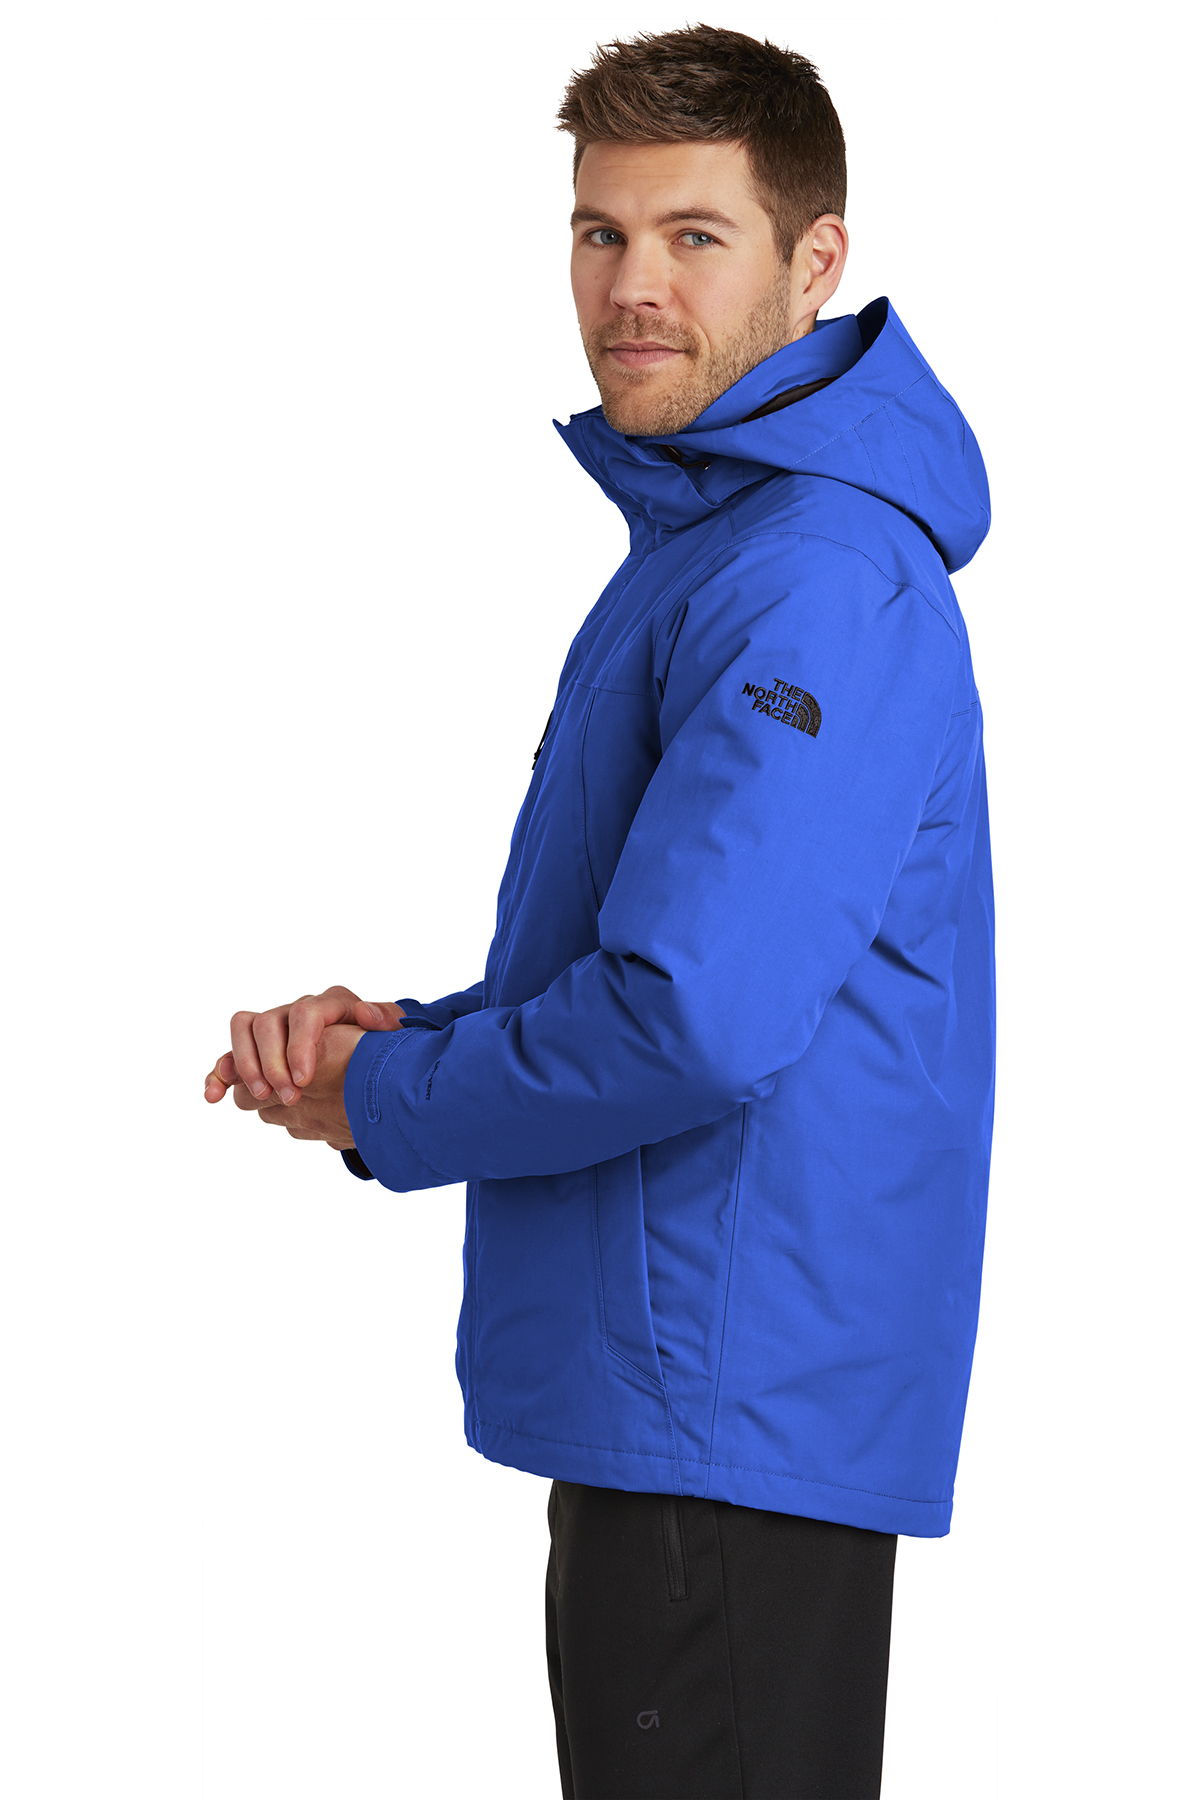 north face traverse triclimate